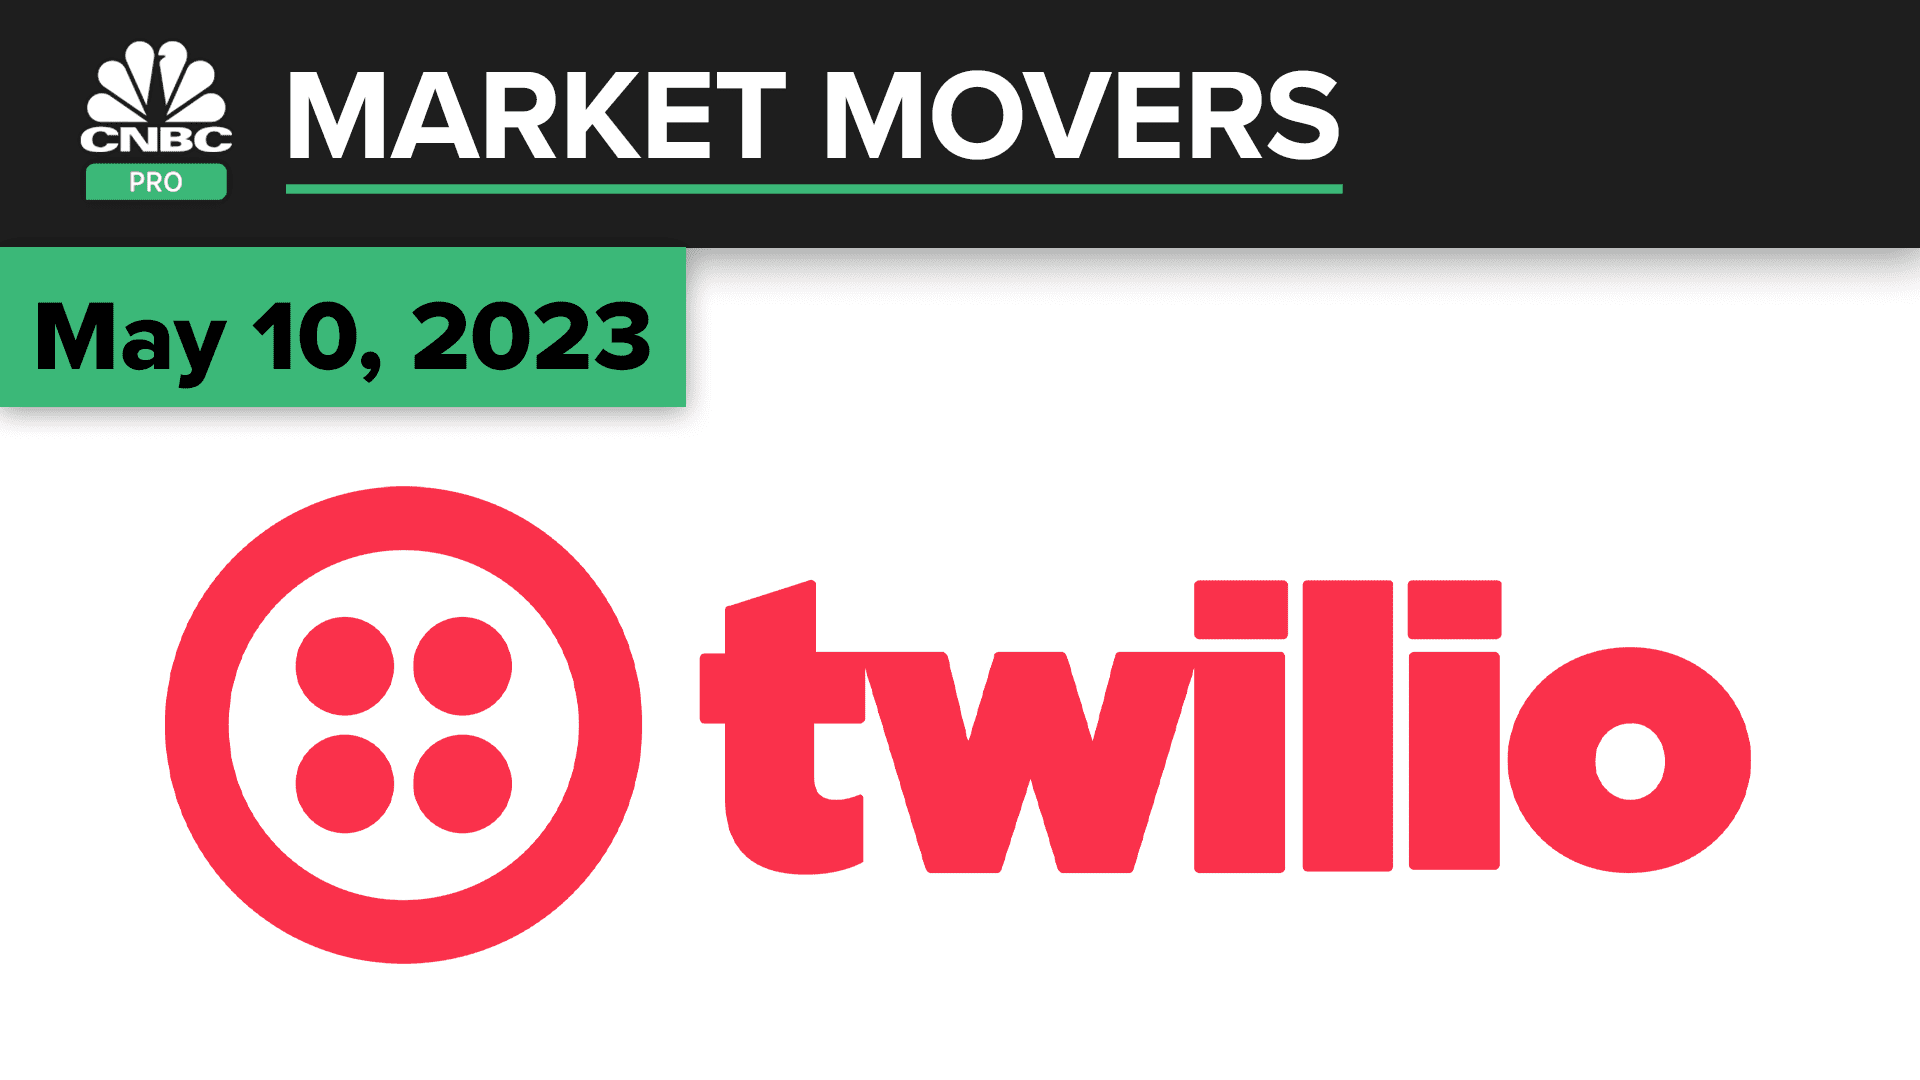 Twilio tanks on 2Q forecast.  That could mean it for the stock